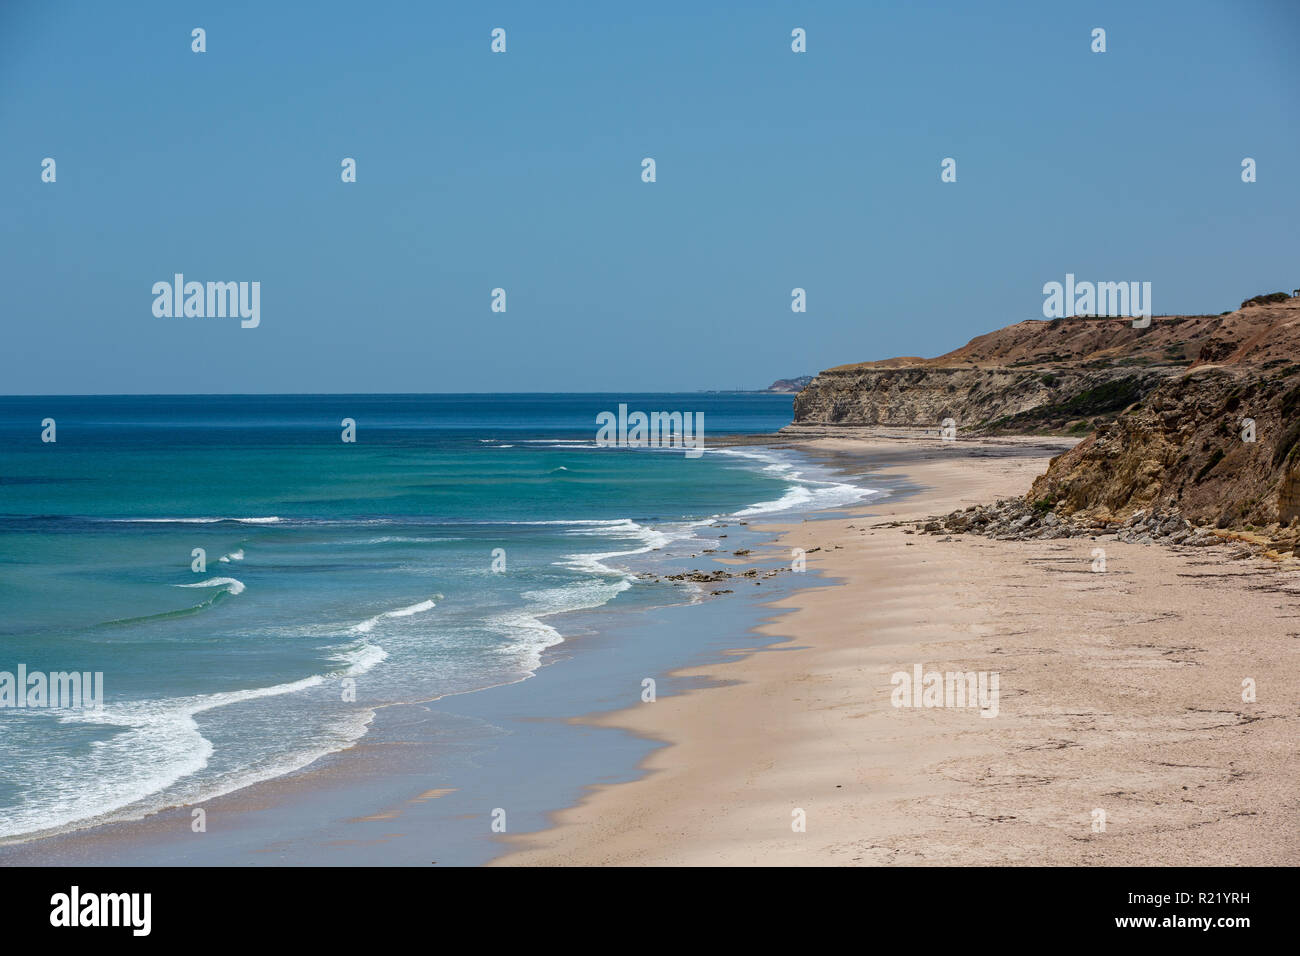 The beautiful Port Willunga beach with turquoise waters on a calm sunny day on 15th November 2018 Stock Photo